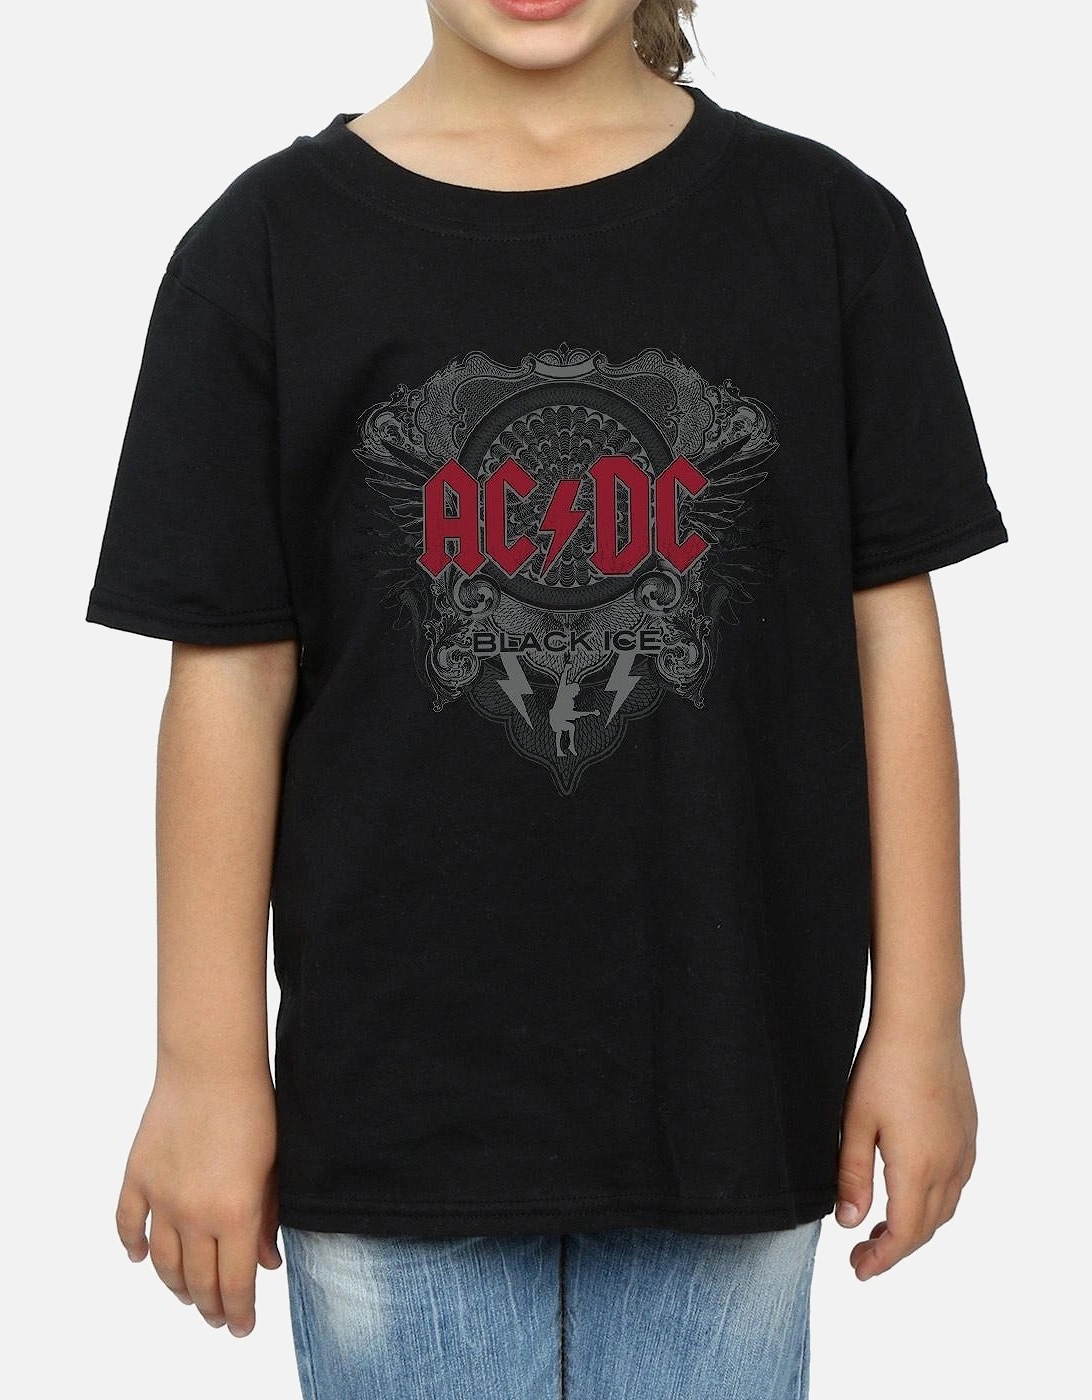 Girls Black Ice With Red Cotton T-Shirt